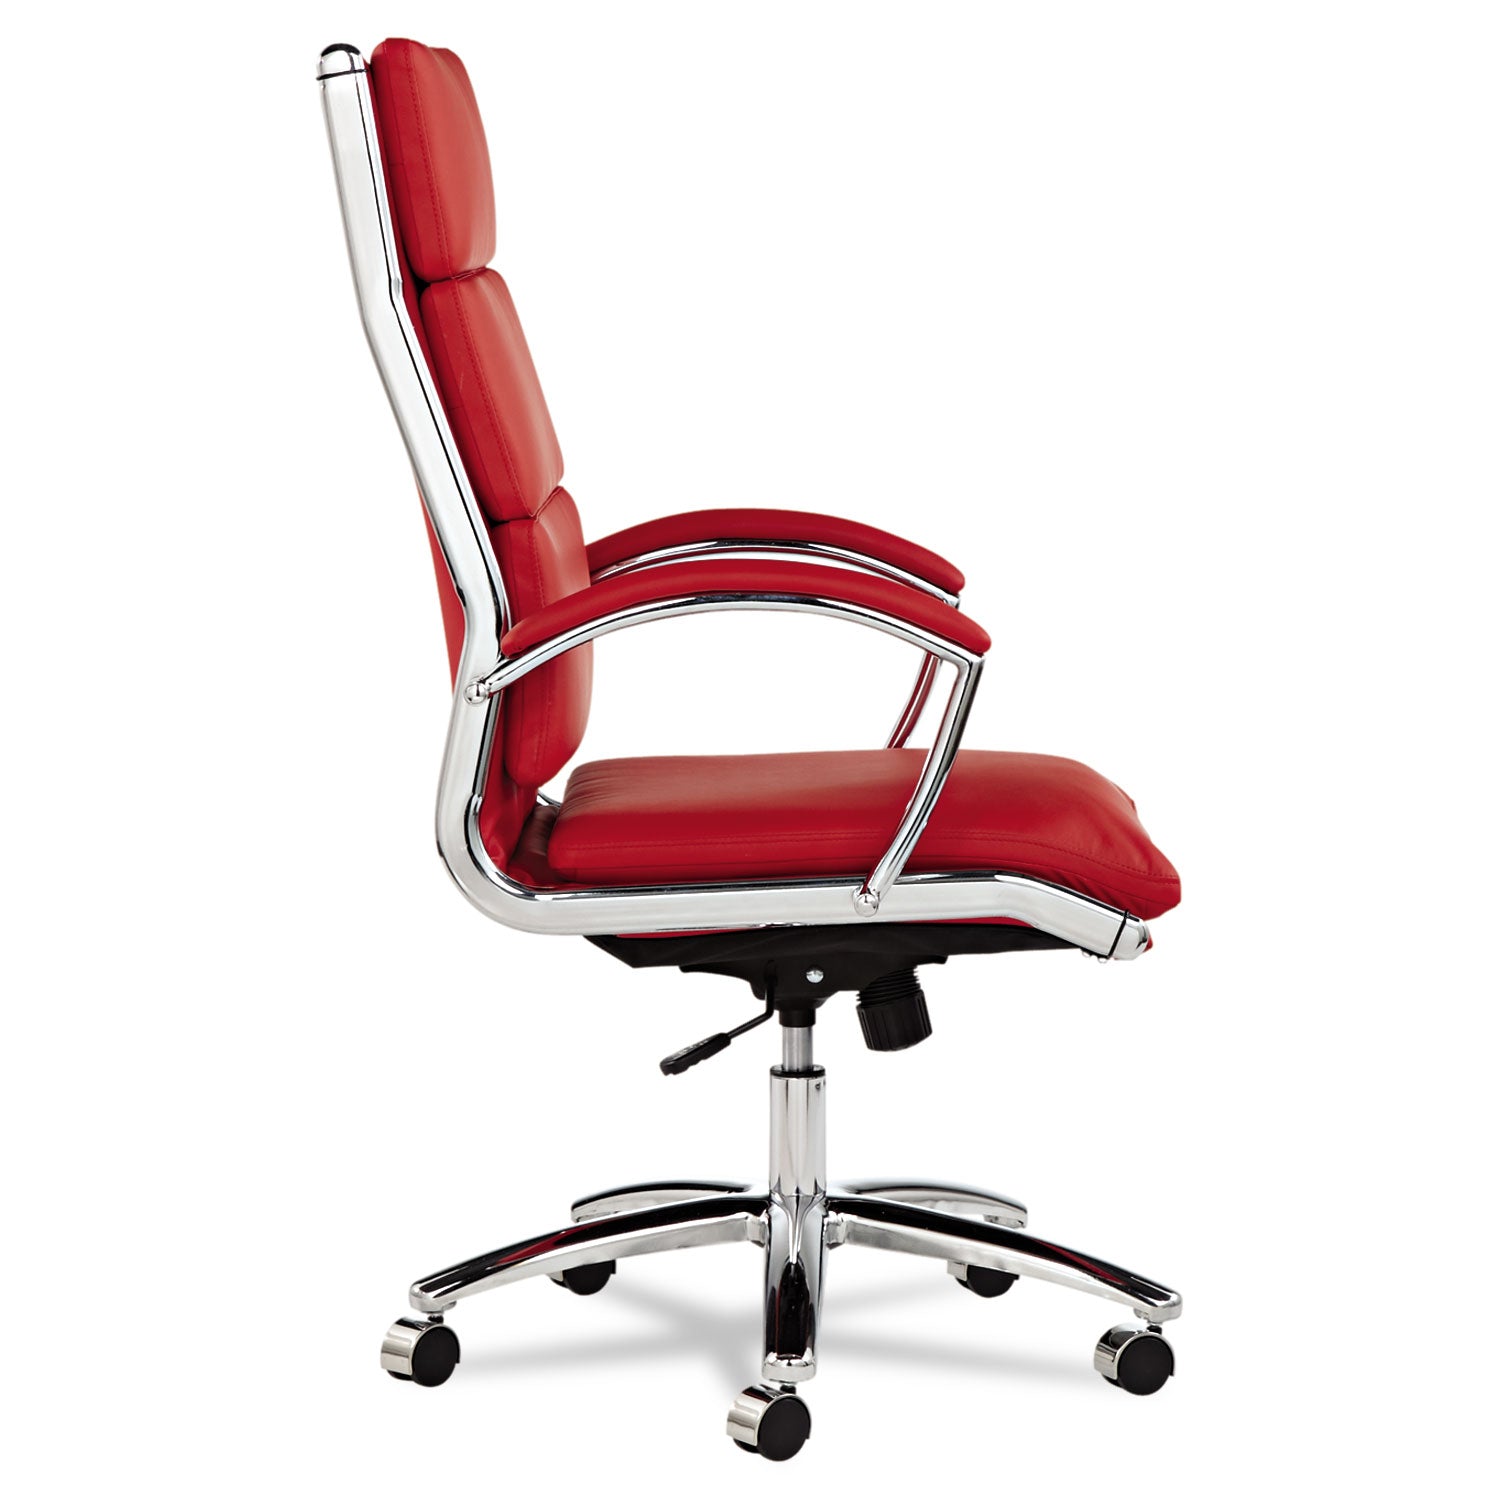 Alera Neratoli High-Back Slim Profile Chair, Faux Leather, Up to 275 lb, 17.32" to 21.25" Seat Height, Red Seat/Back, Chrome - 